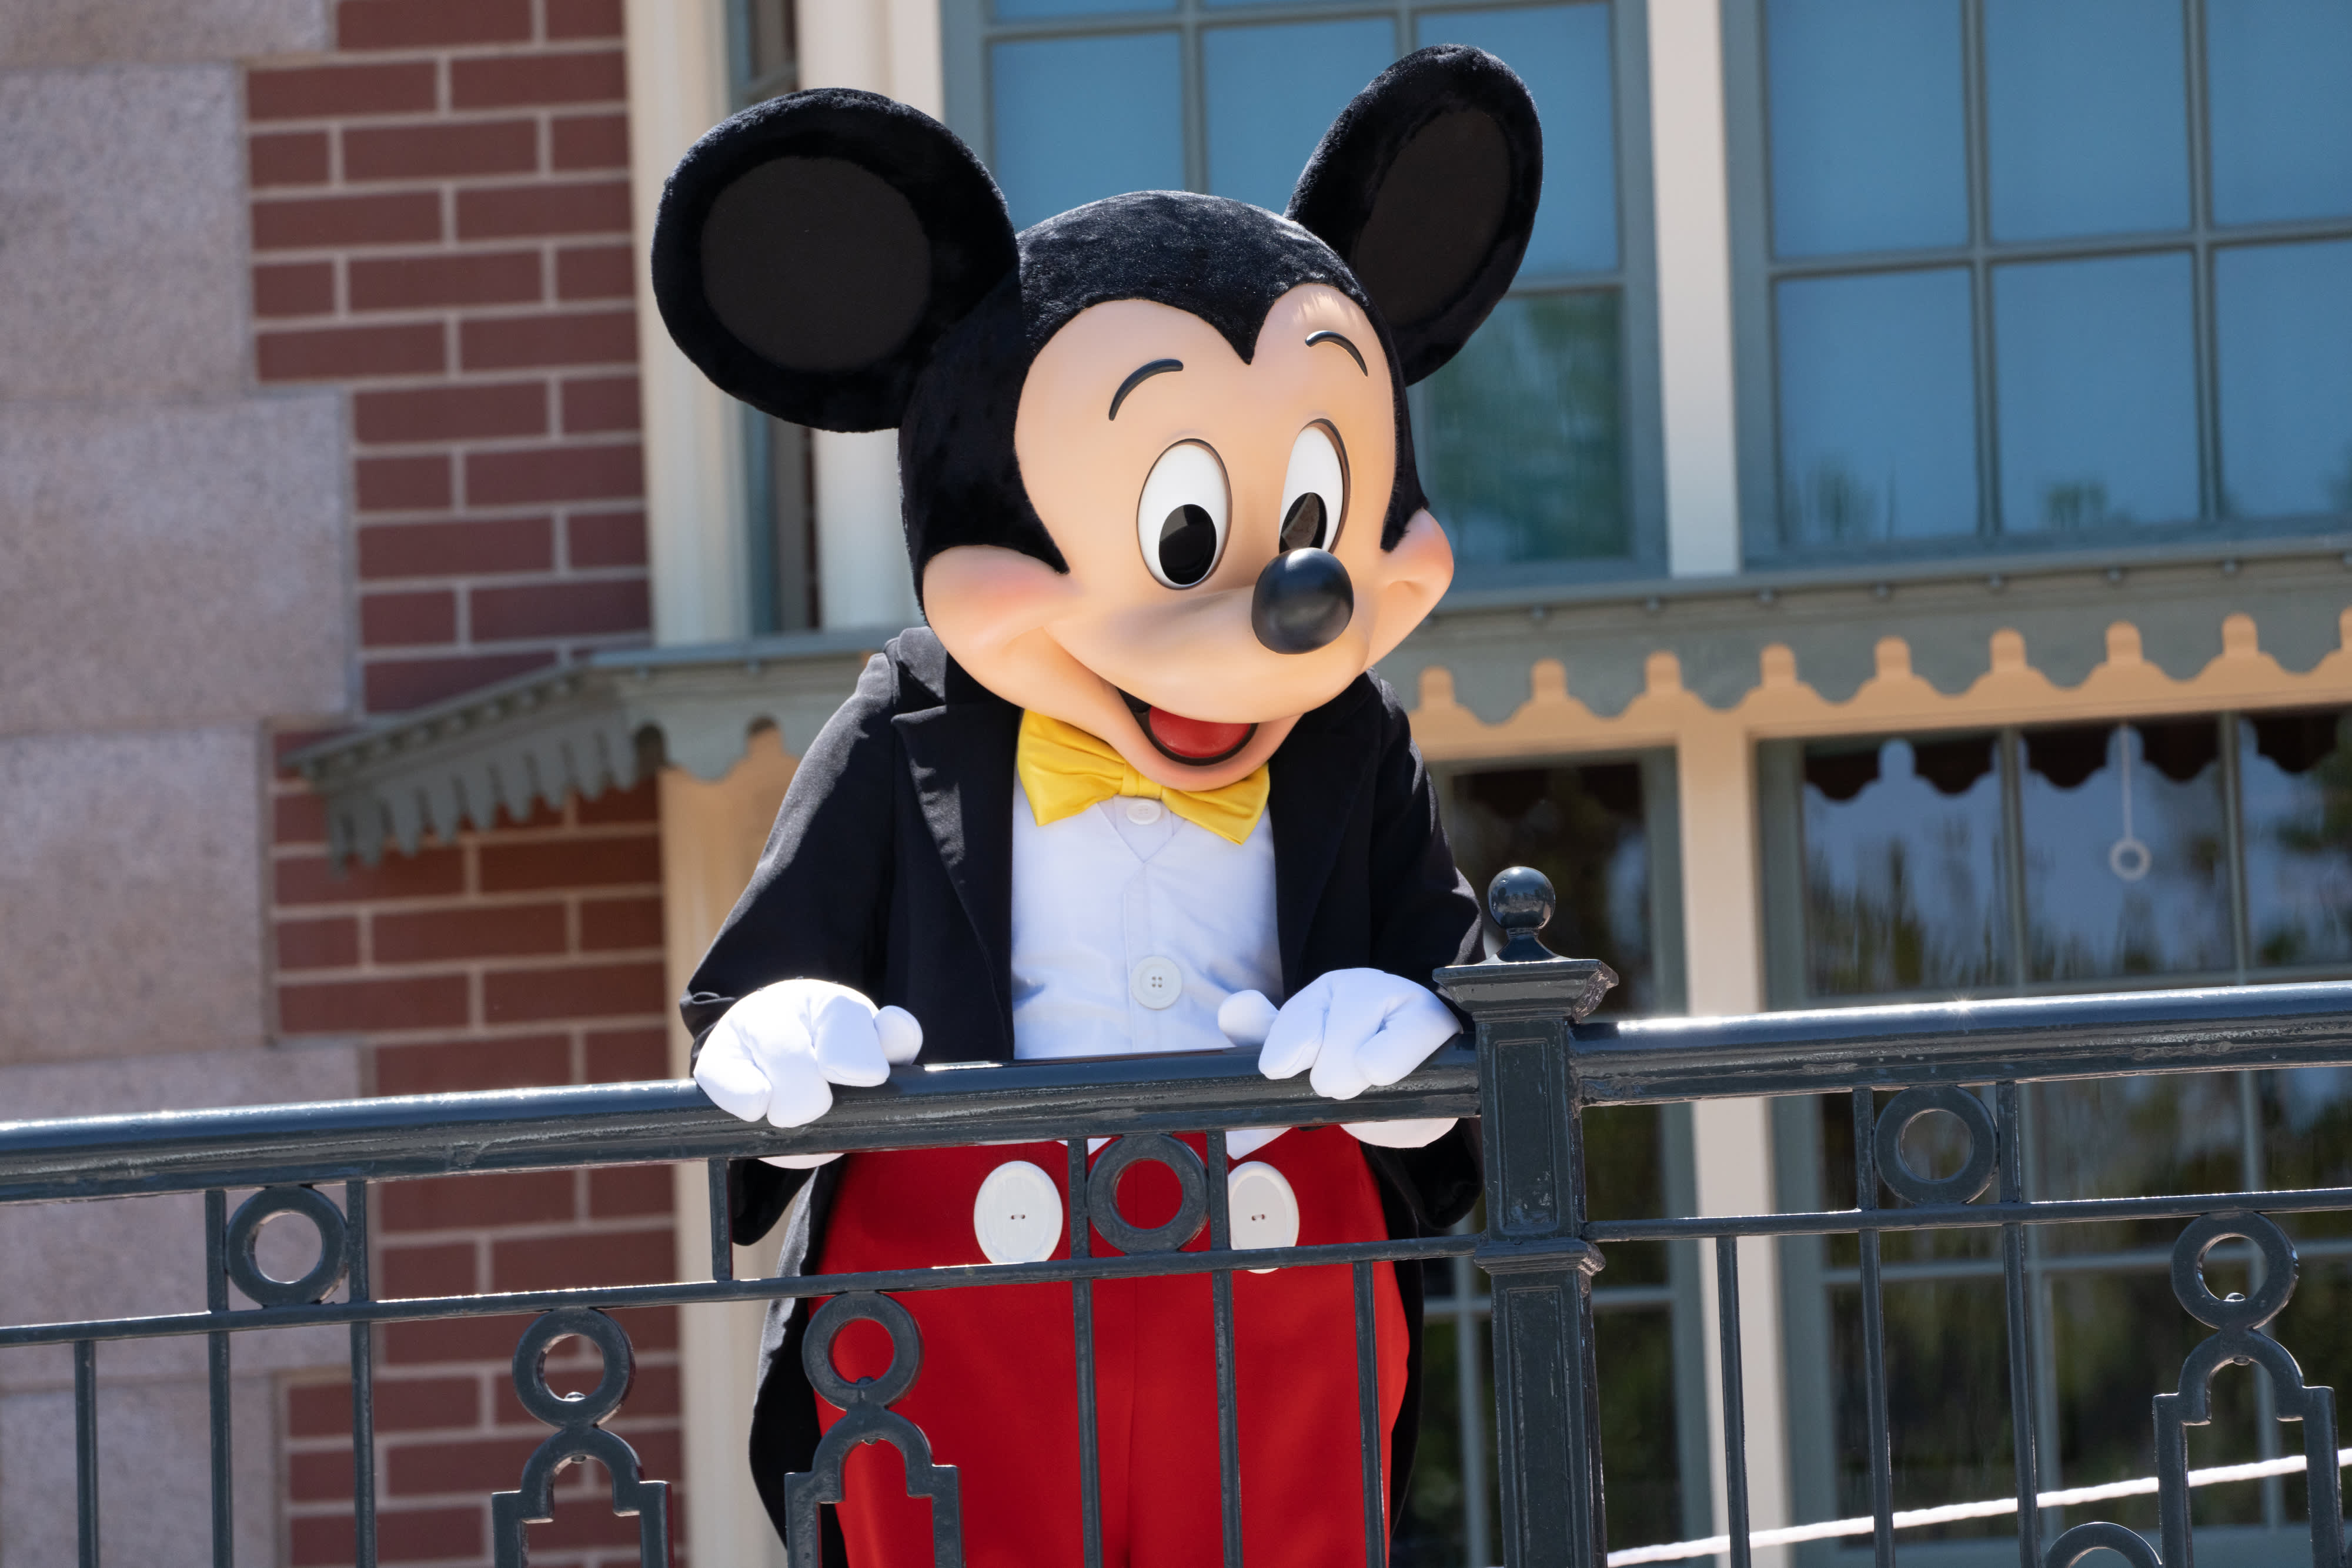 https://media.nbclosangeles.com/2021/07/106882821-1620931316186-gettyimages-1232614603-DISNEYLAND_REOPENING.jpeg?quality=85&strip=all&fit=4000%2C2667